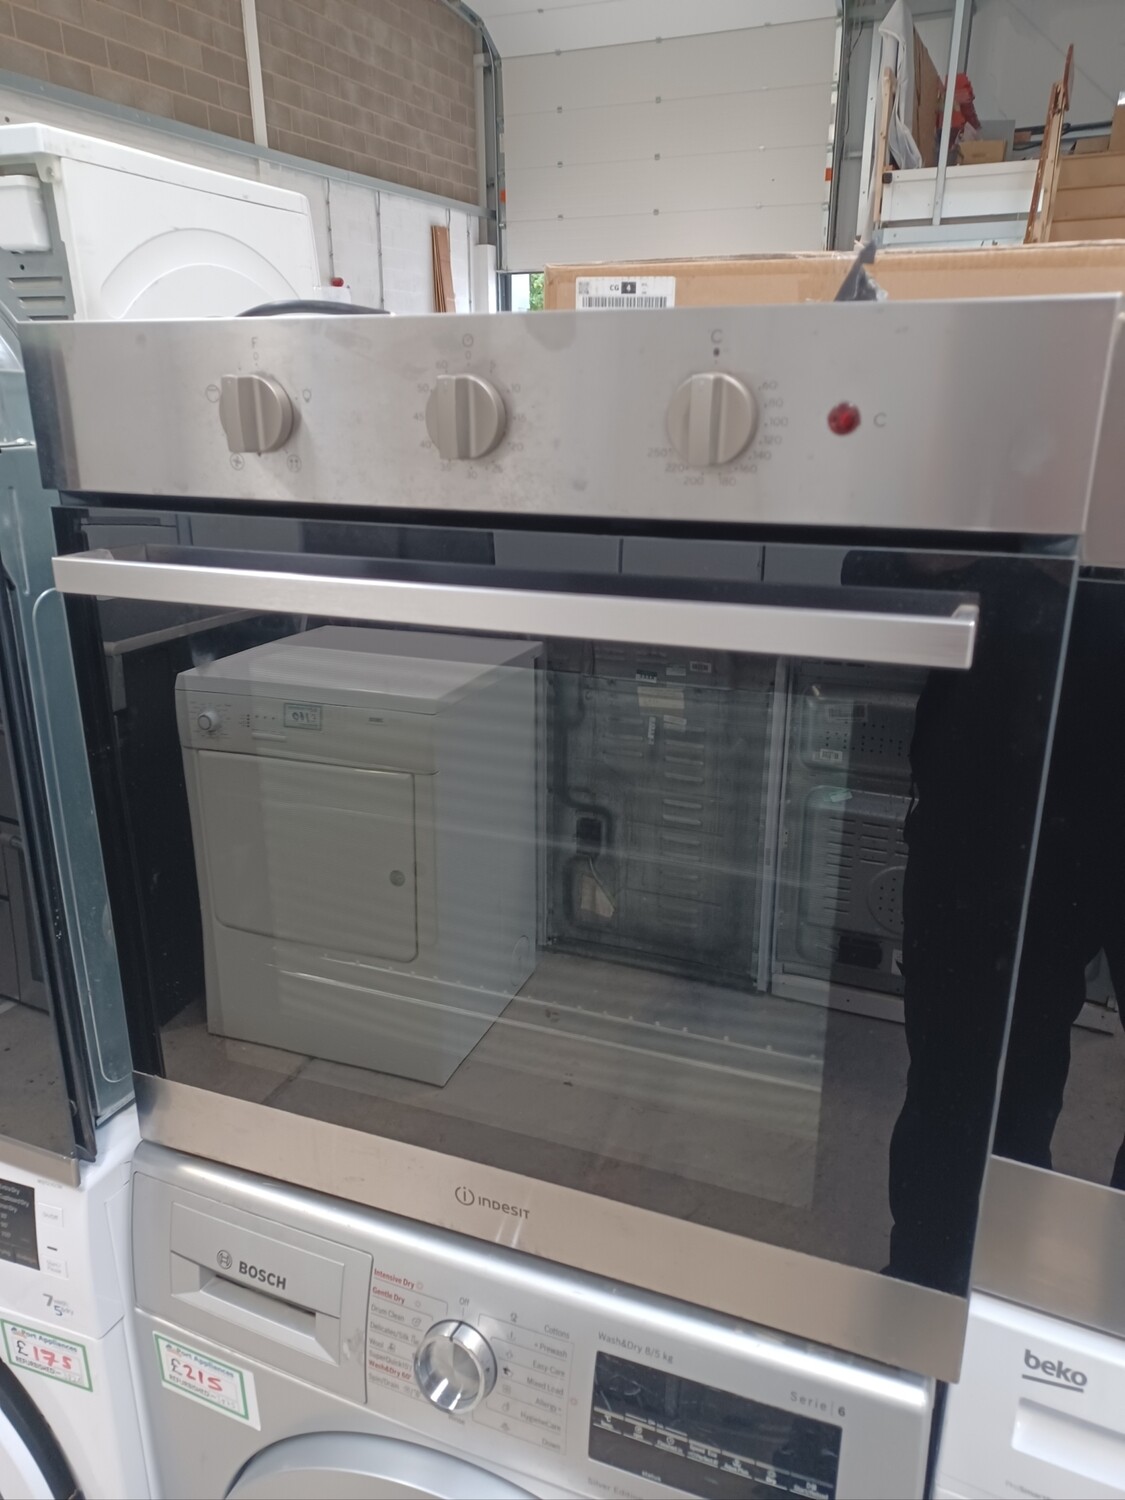 Indesit 60cm x 60cm Single Electric Built in Oven - Refurbished